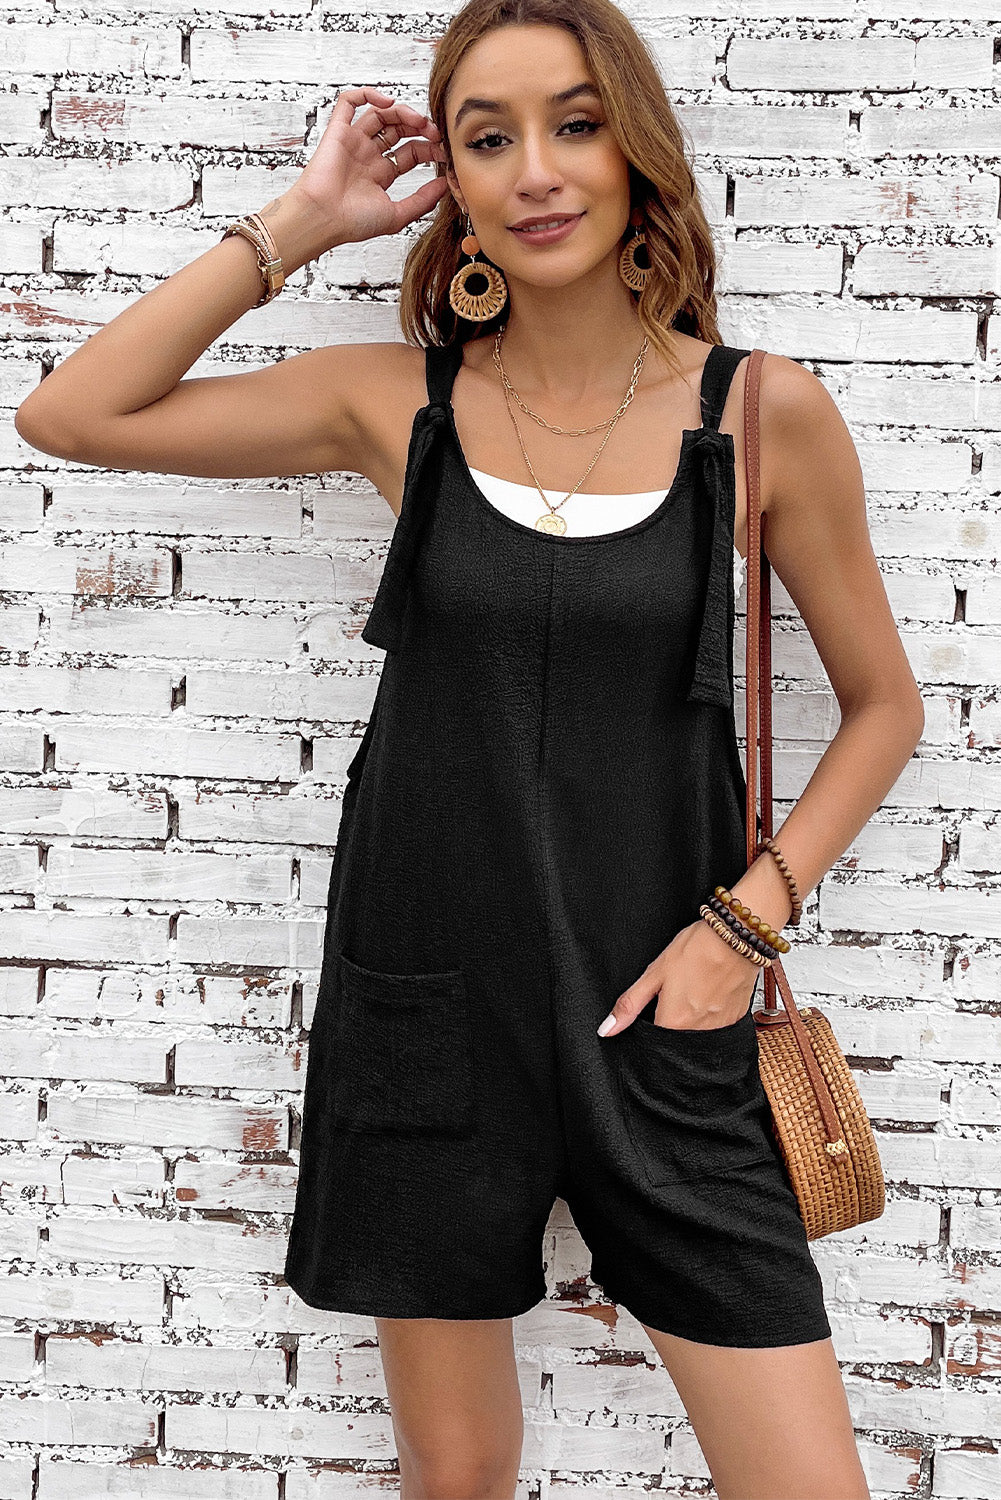 LC6412245-2-S, LC6412245-2-M, LC6412245-2-L, LC6412245-2-XL, LC6412245-2-2XL, Black Adjustable Straps Pocketed Textured Romper